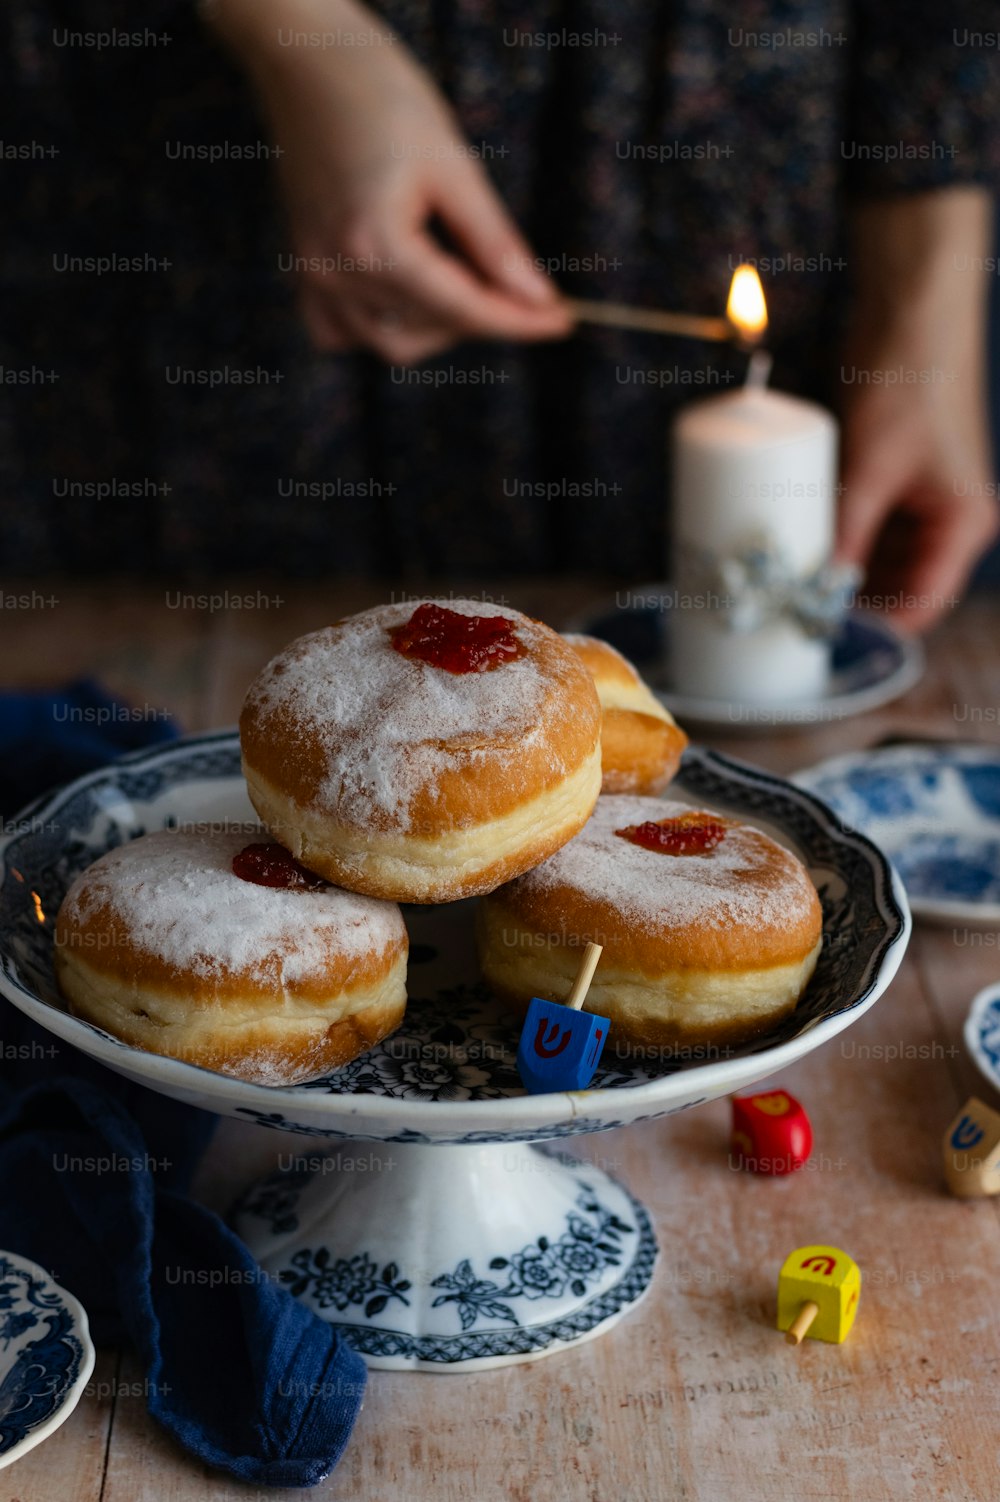 a person lighting a candle on a plate of donuts